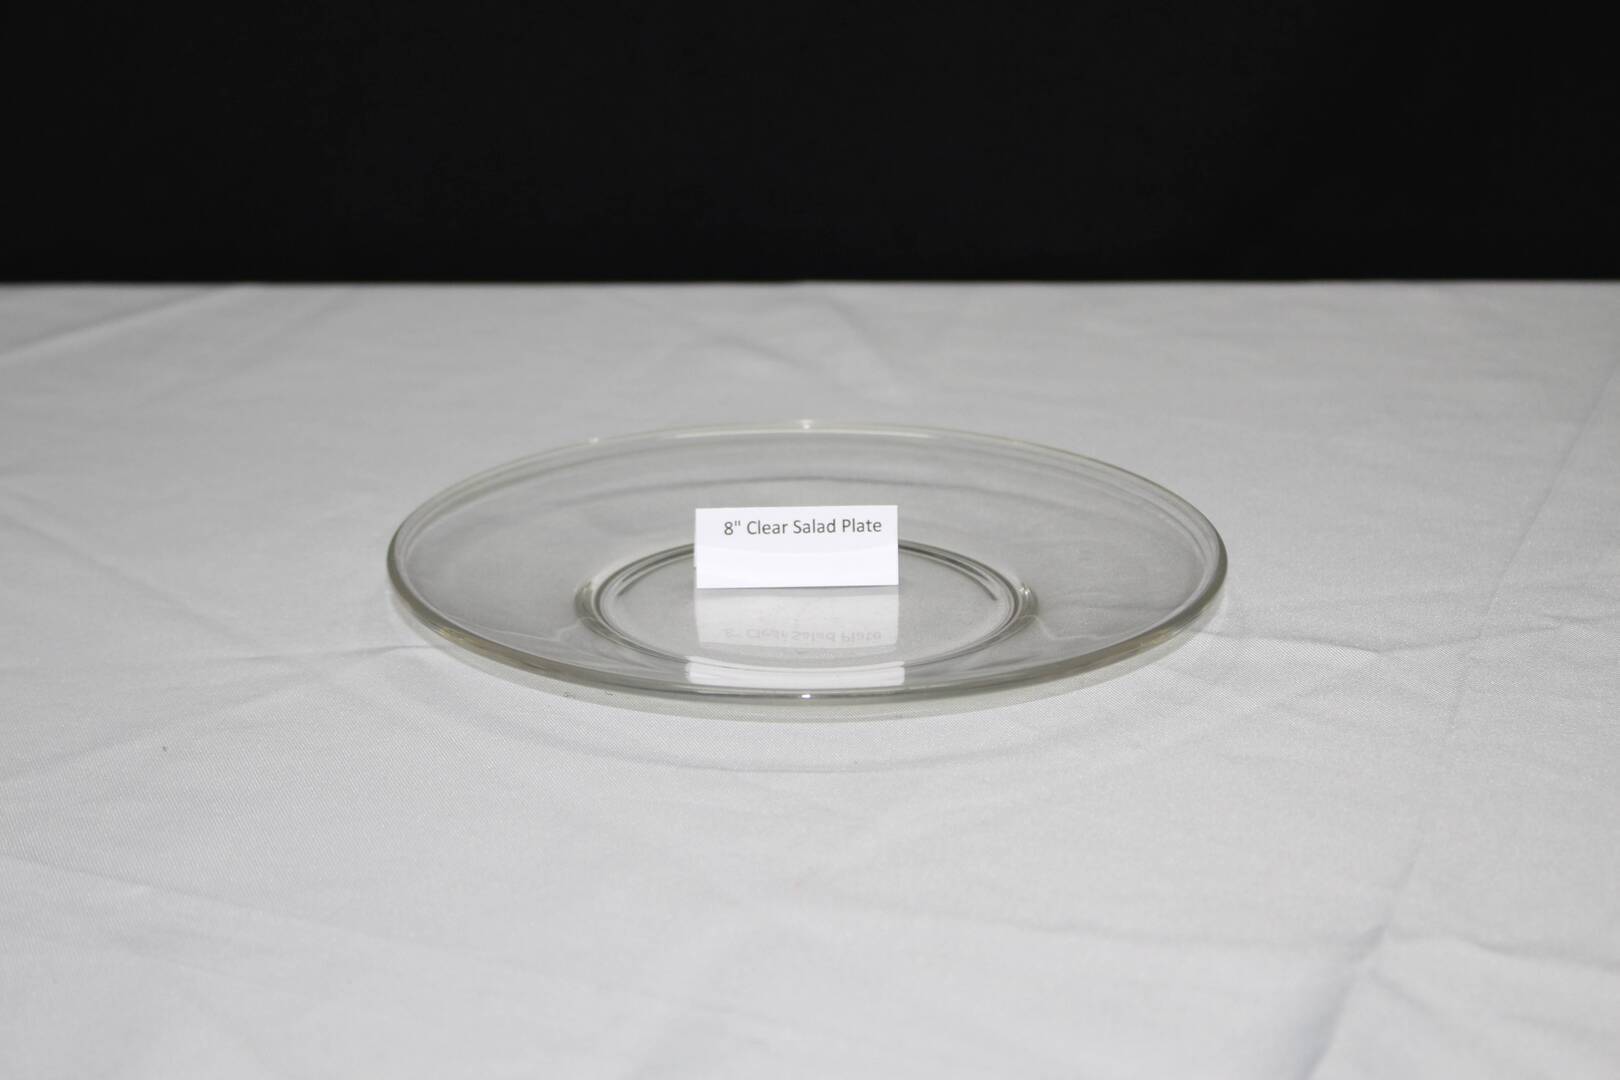 8" clear plate